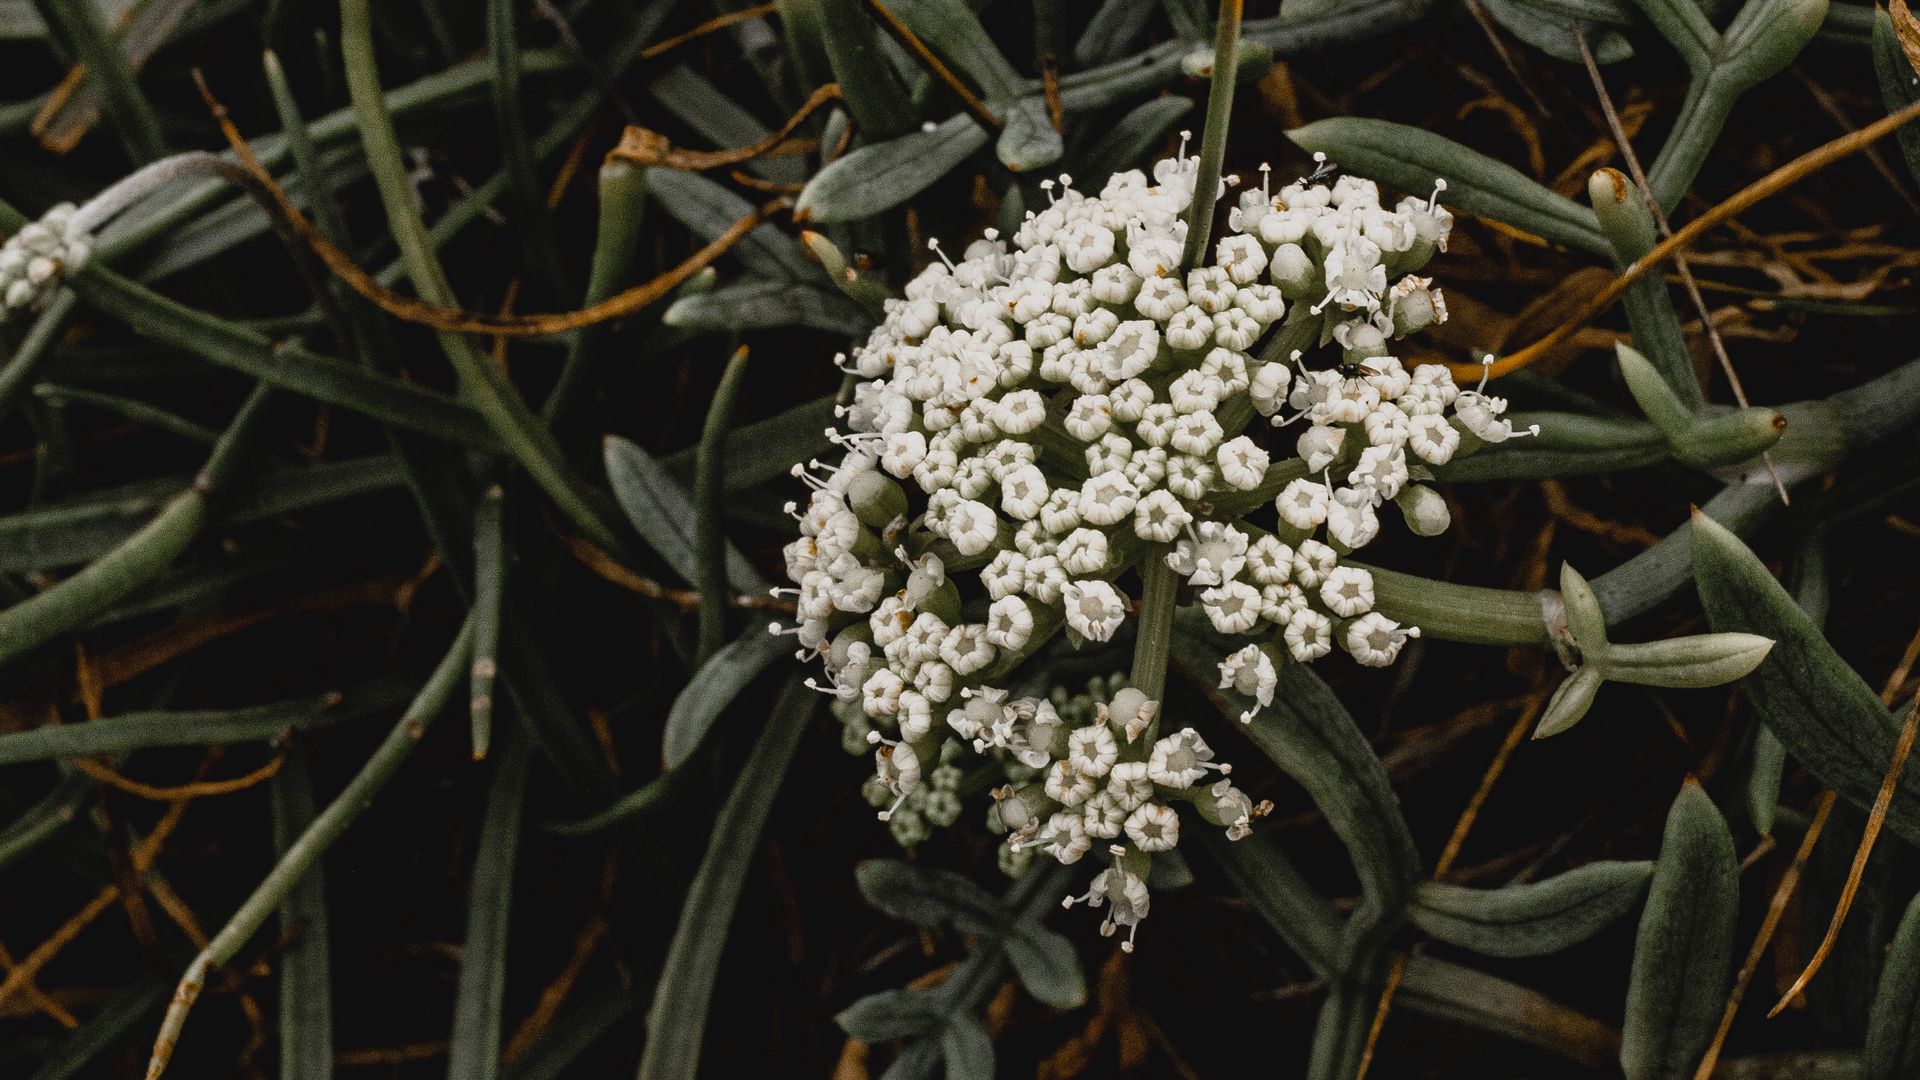 Download wallpaper 1920x1080 inflorescence, flowers, white, grass ...